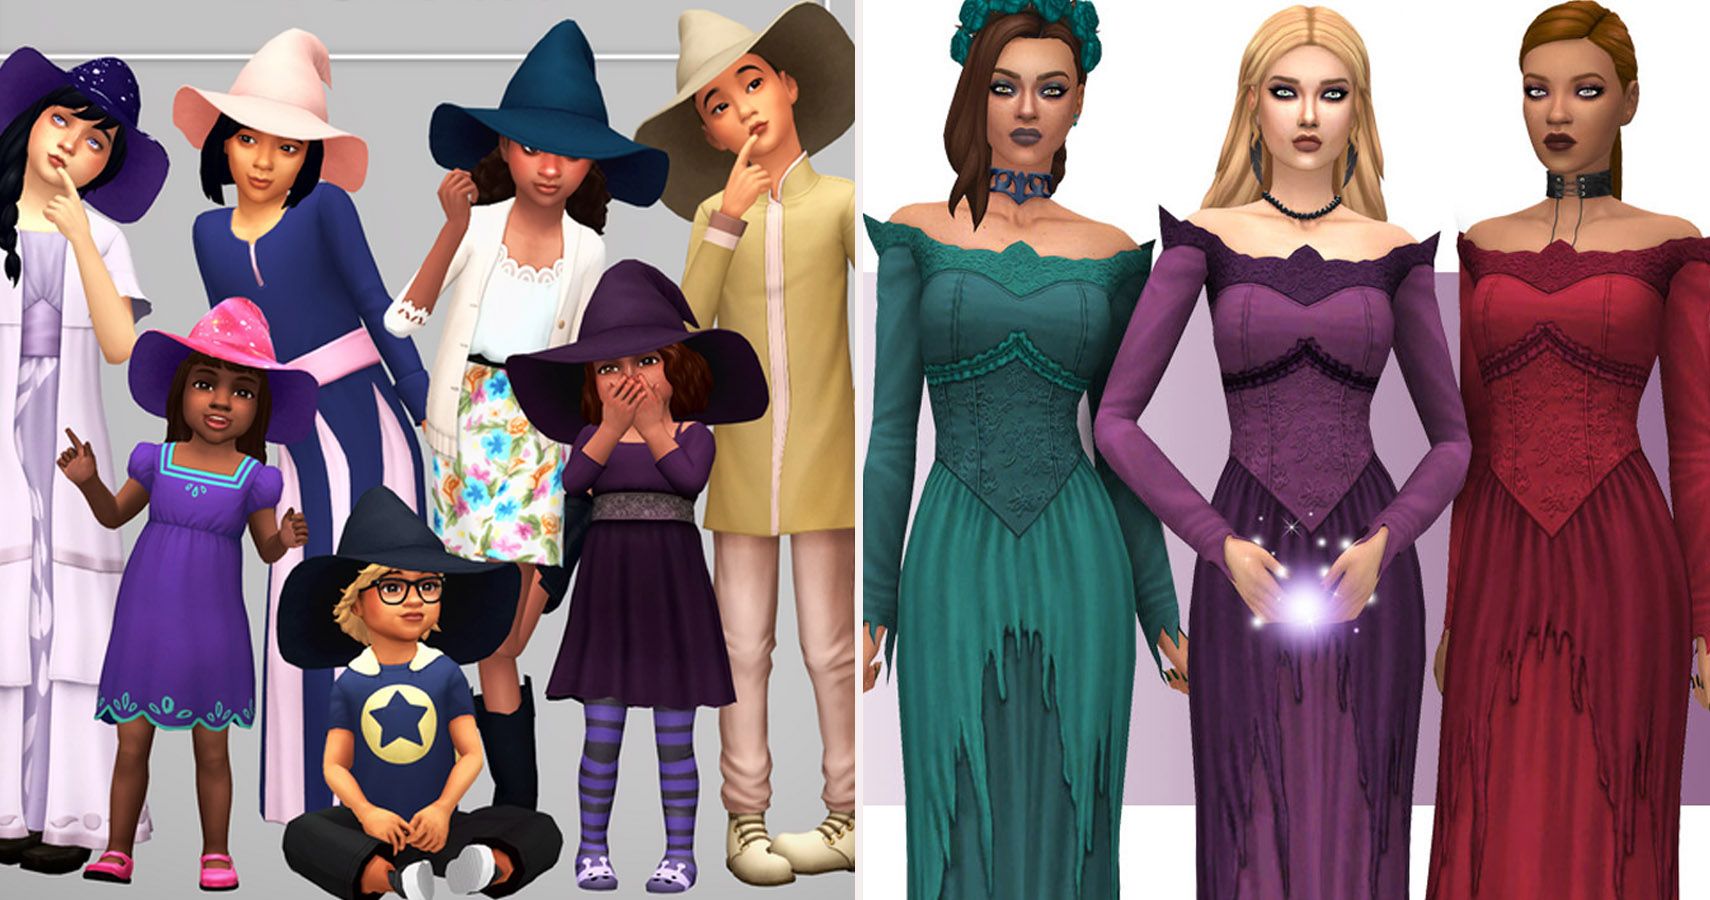 Sims 4 Witches